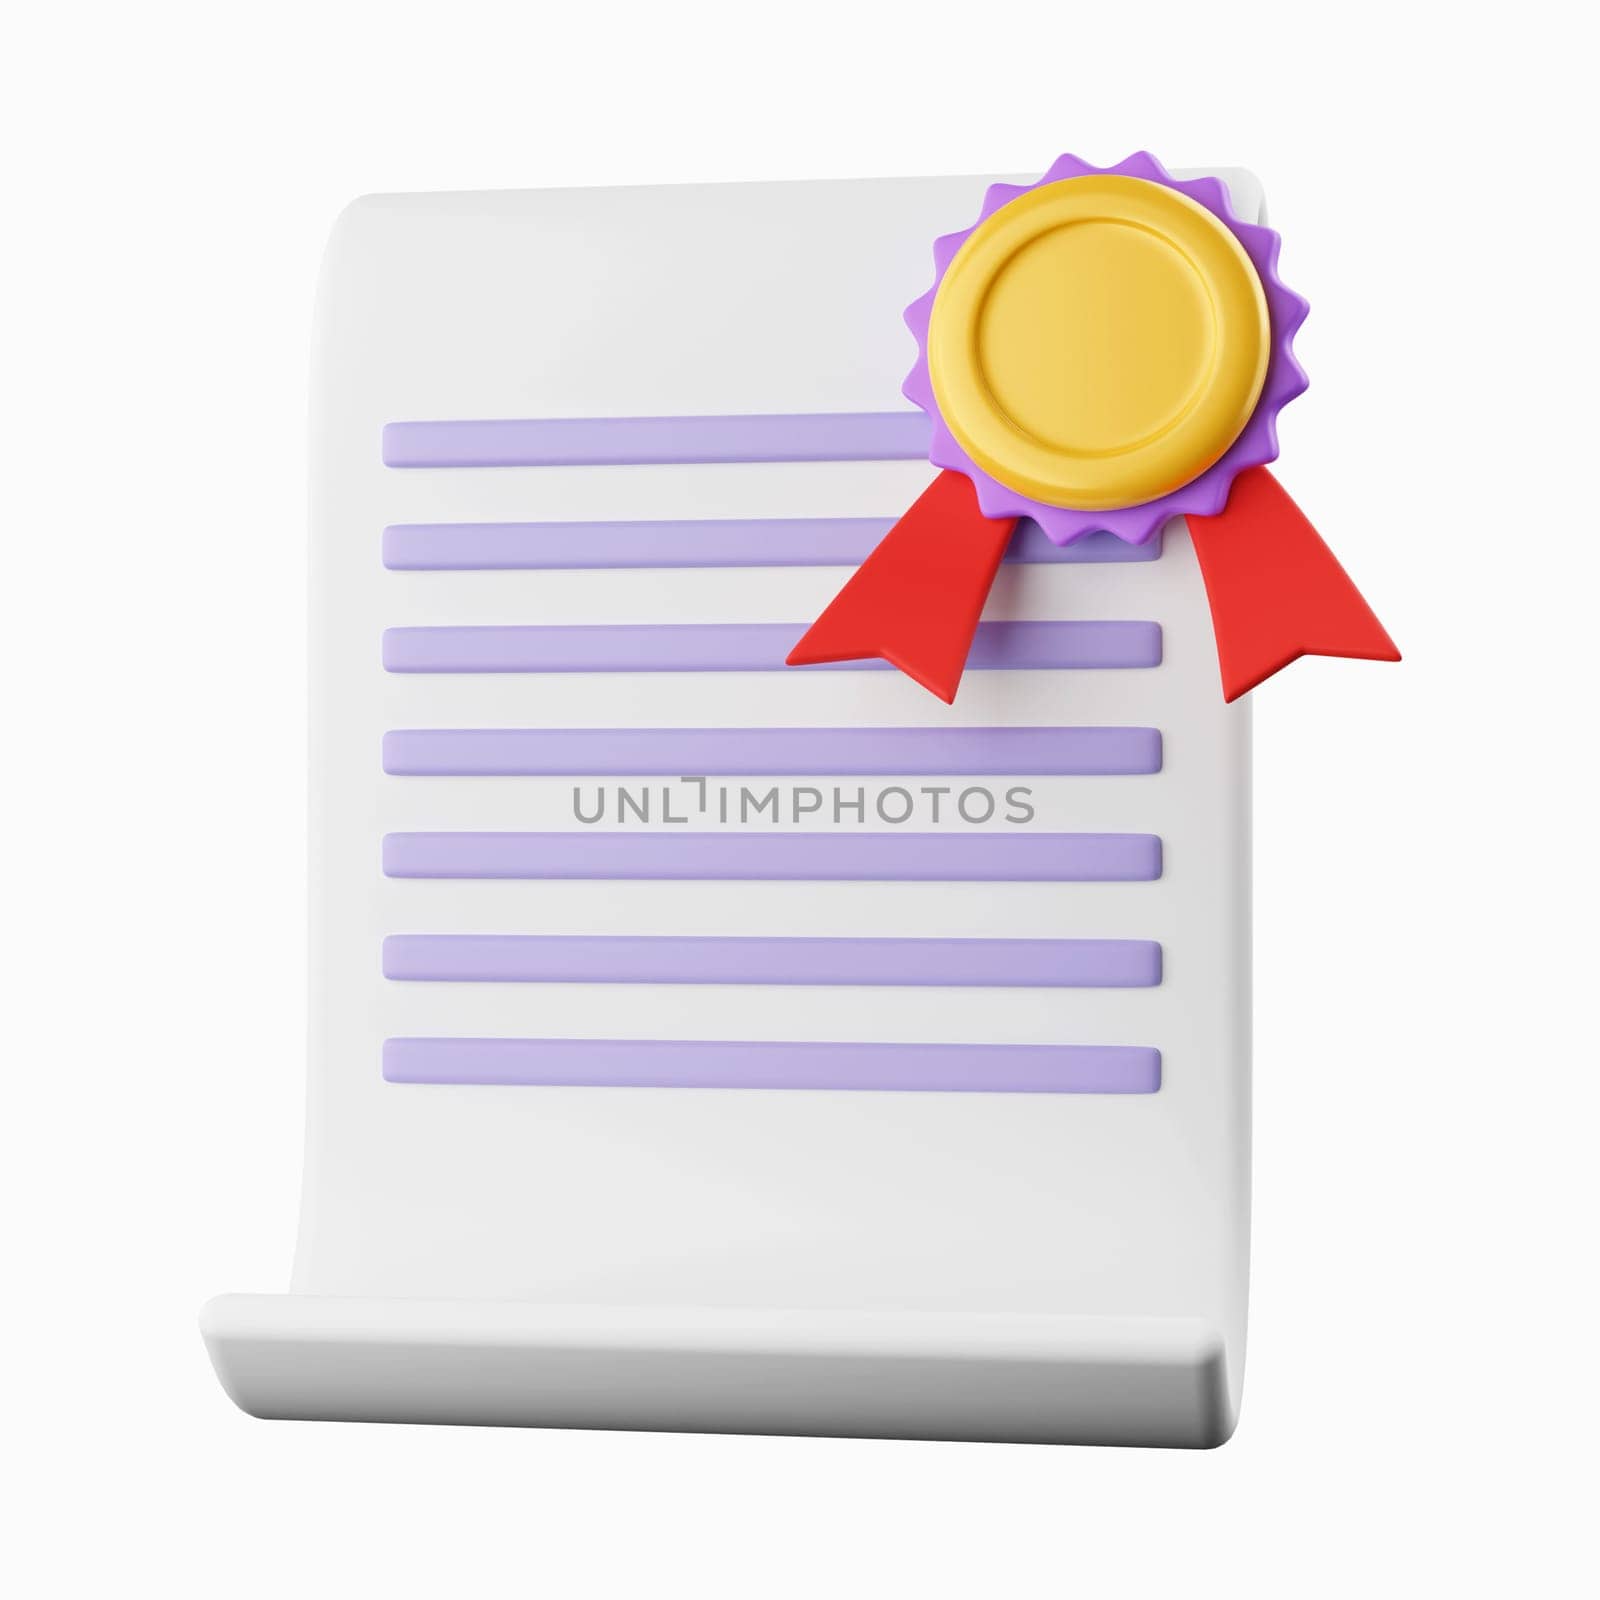 3d Certificate. Achievement, award, grant, diploma concepts. isolated on background, icon symbol clipping path. 3d render illustration.